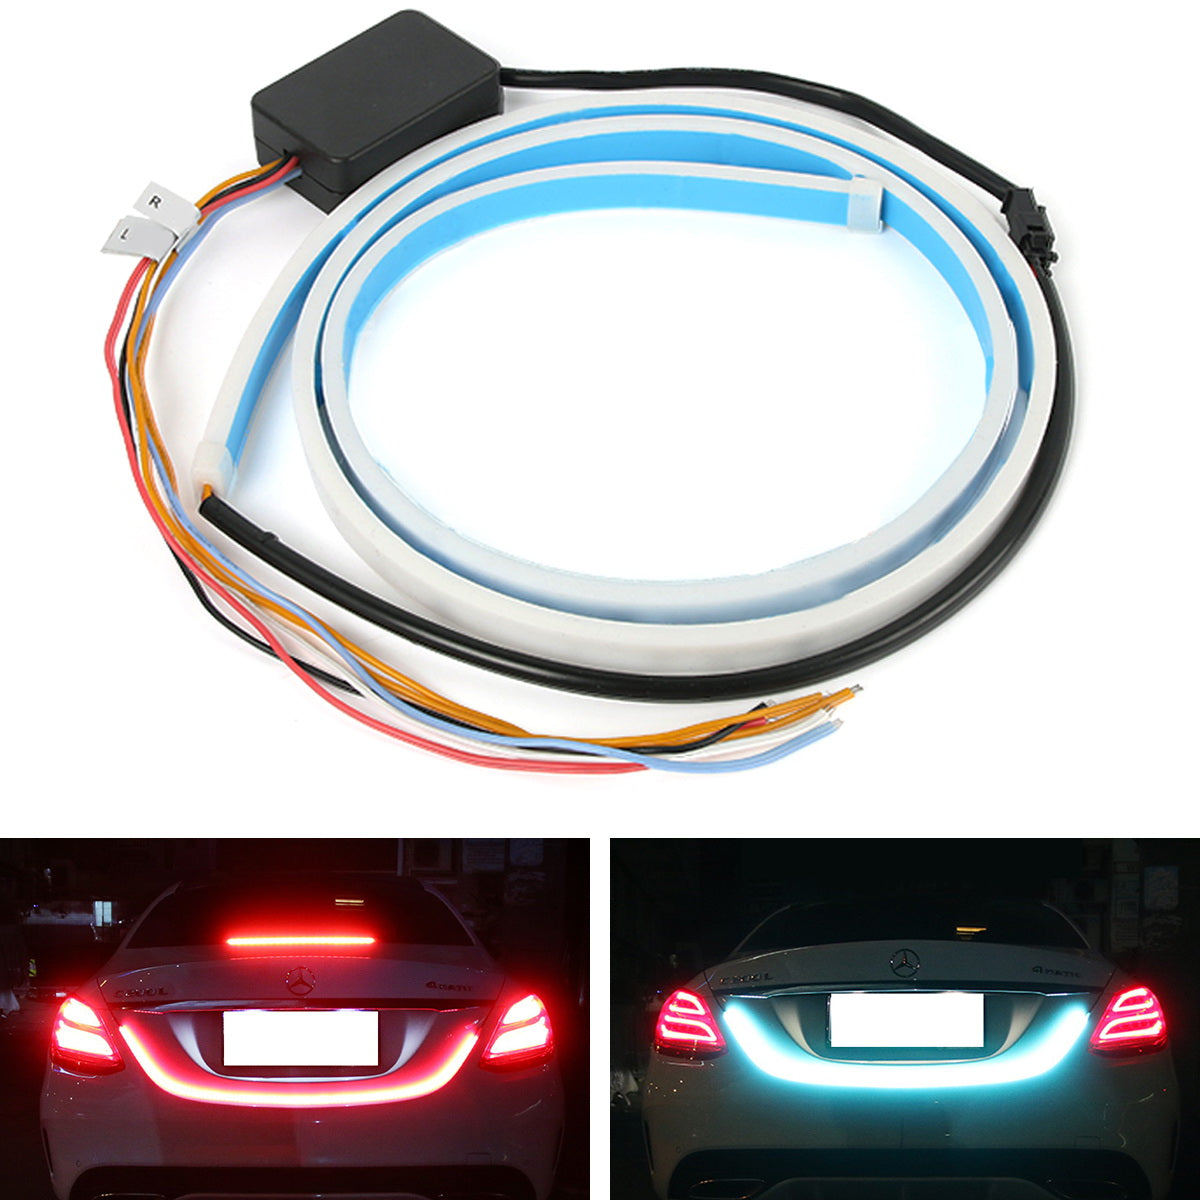 Best Deal for iJDMTOY F1 Style Strobe Featured LED Trunk Lid High